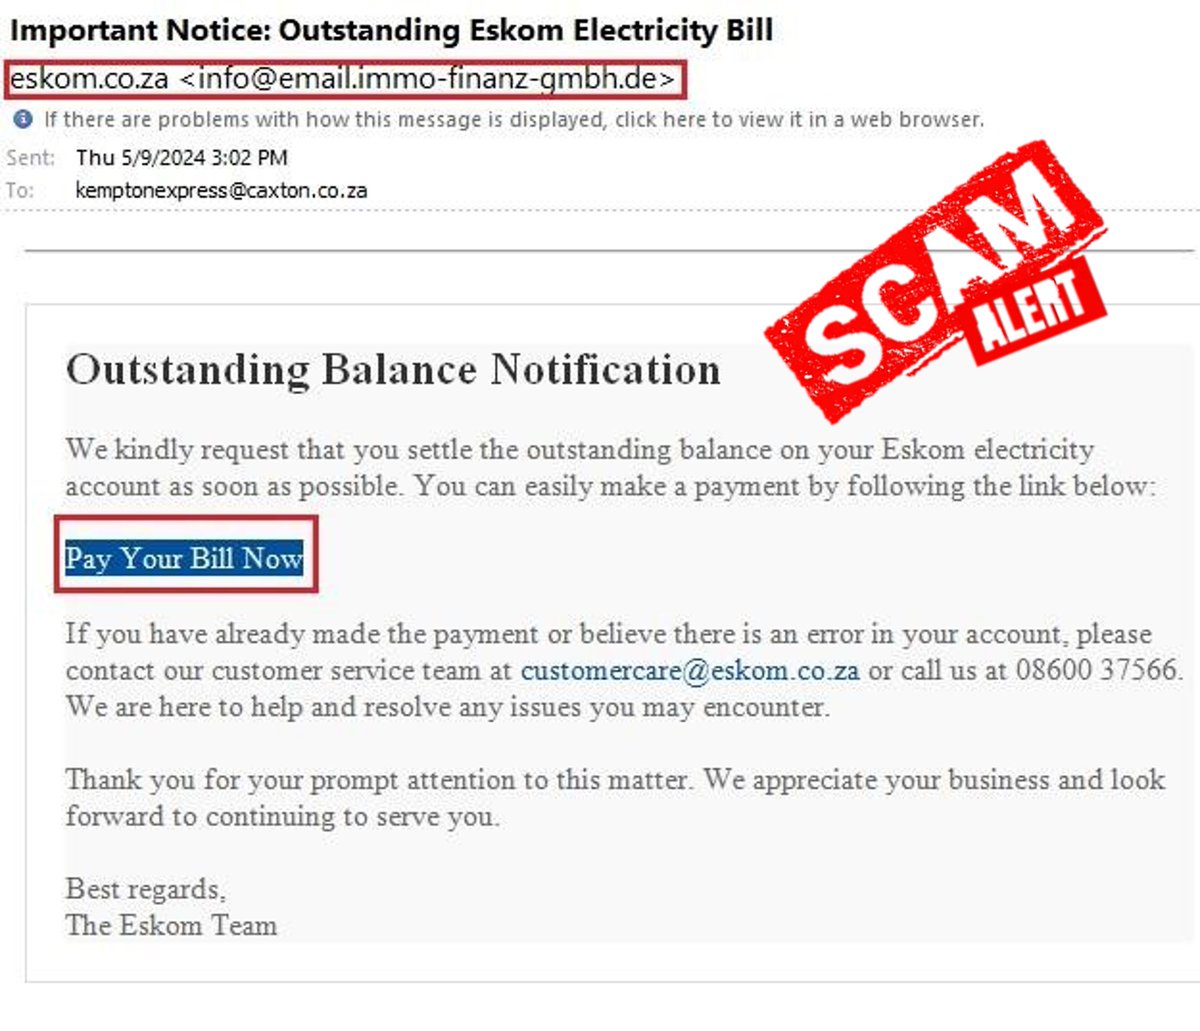 #EskomGauteng #ScamAlert Eskom is aware of the e-mail sent to Kempton Park residents informing them to pay their outstanding Eskom electricity bills. Residents are advised to disregard the email and not to make any payments in line with the e-mail. Payments to Eskom should